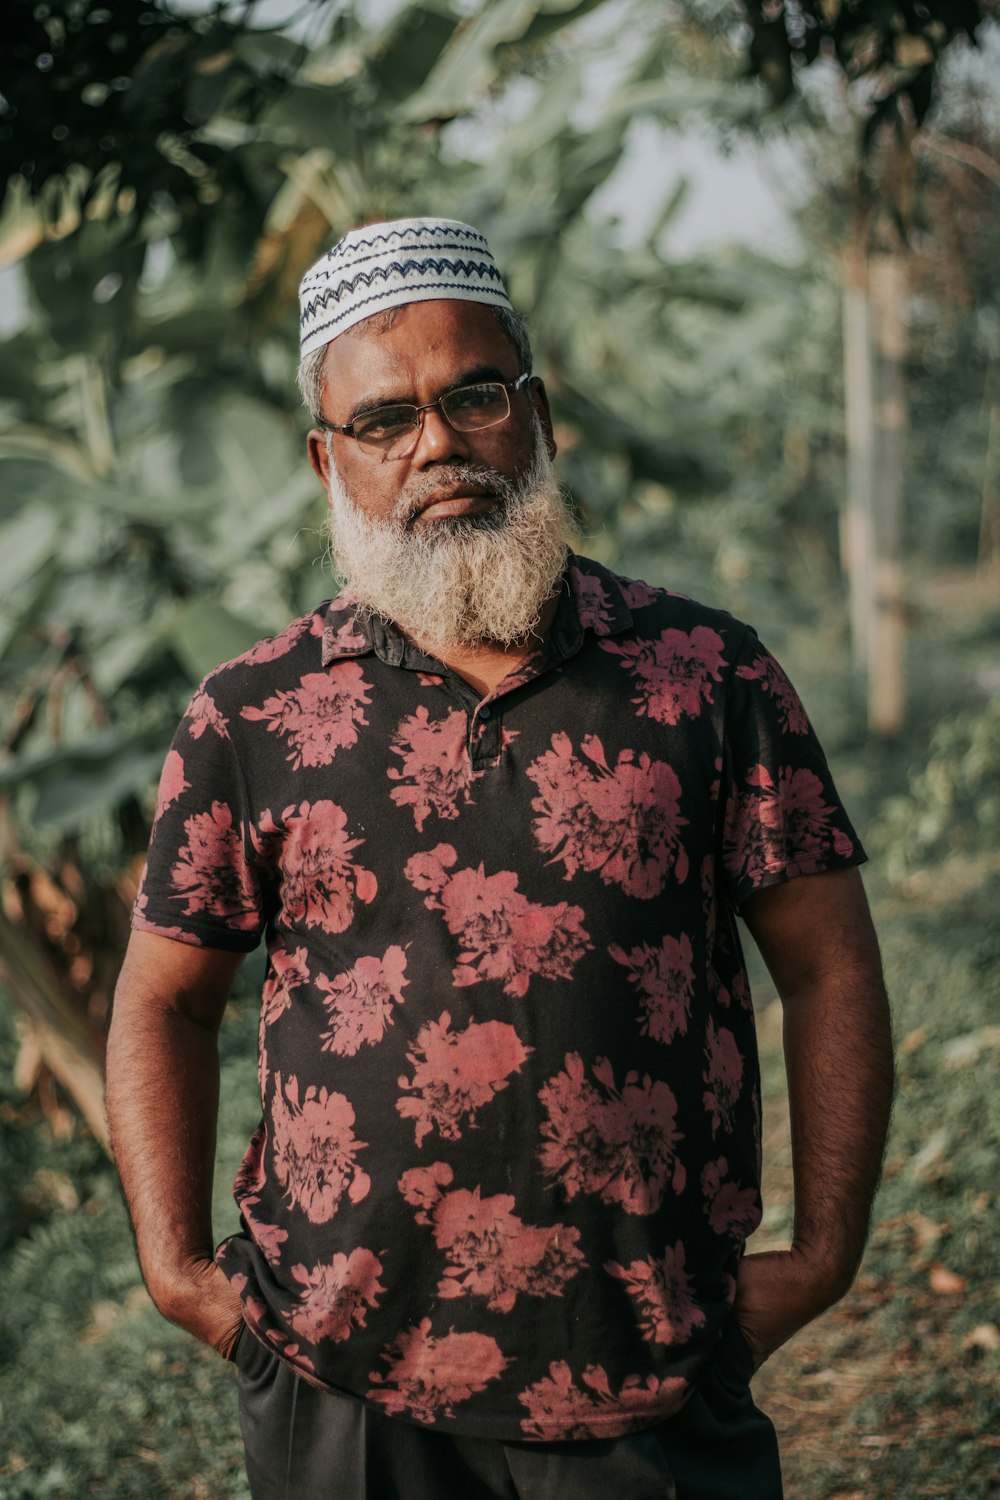 a man with a white beard wearing a floral shirt